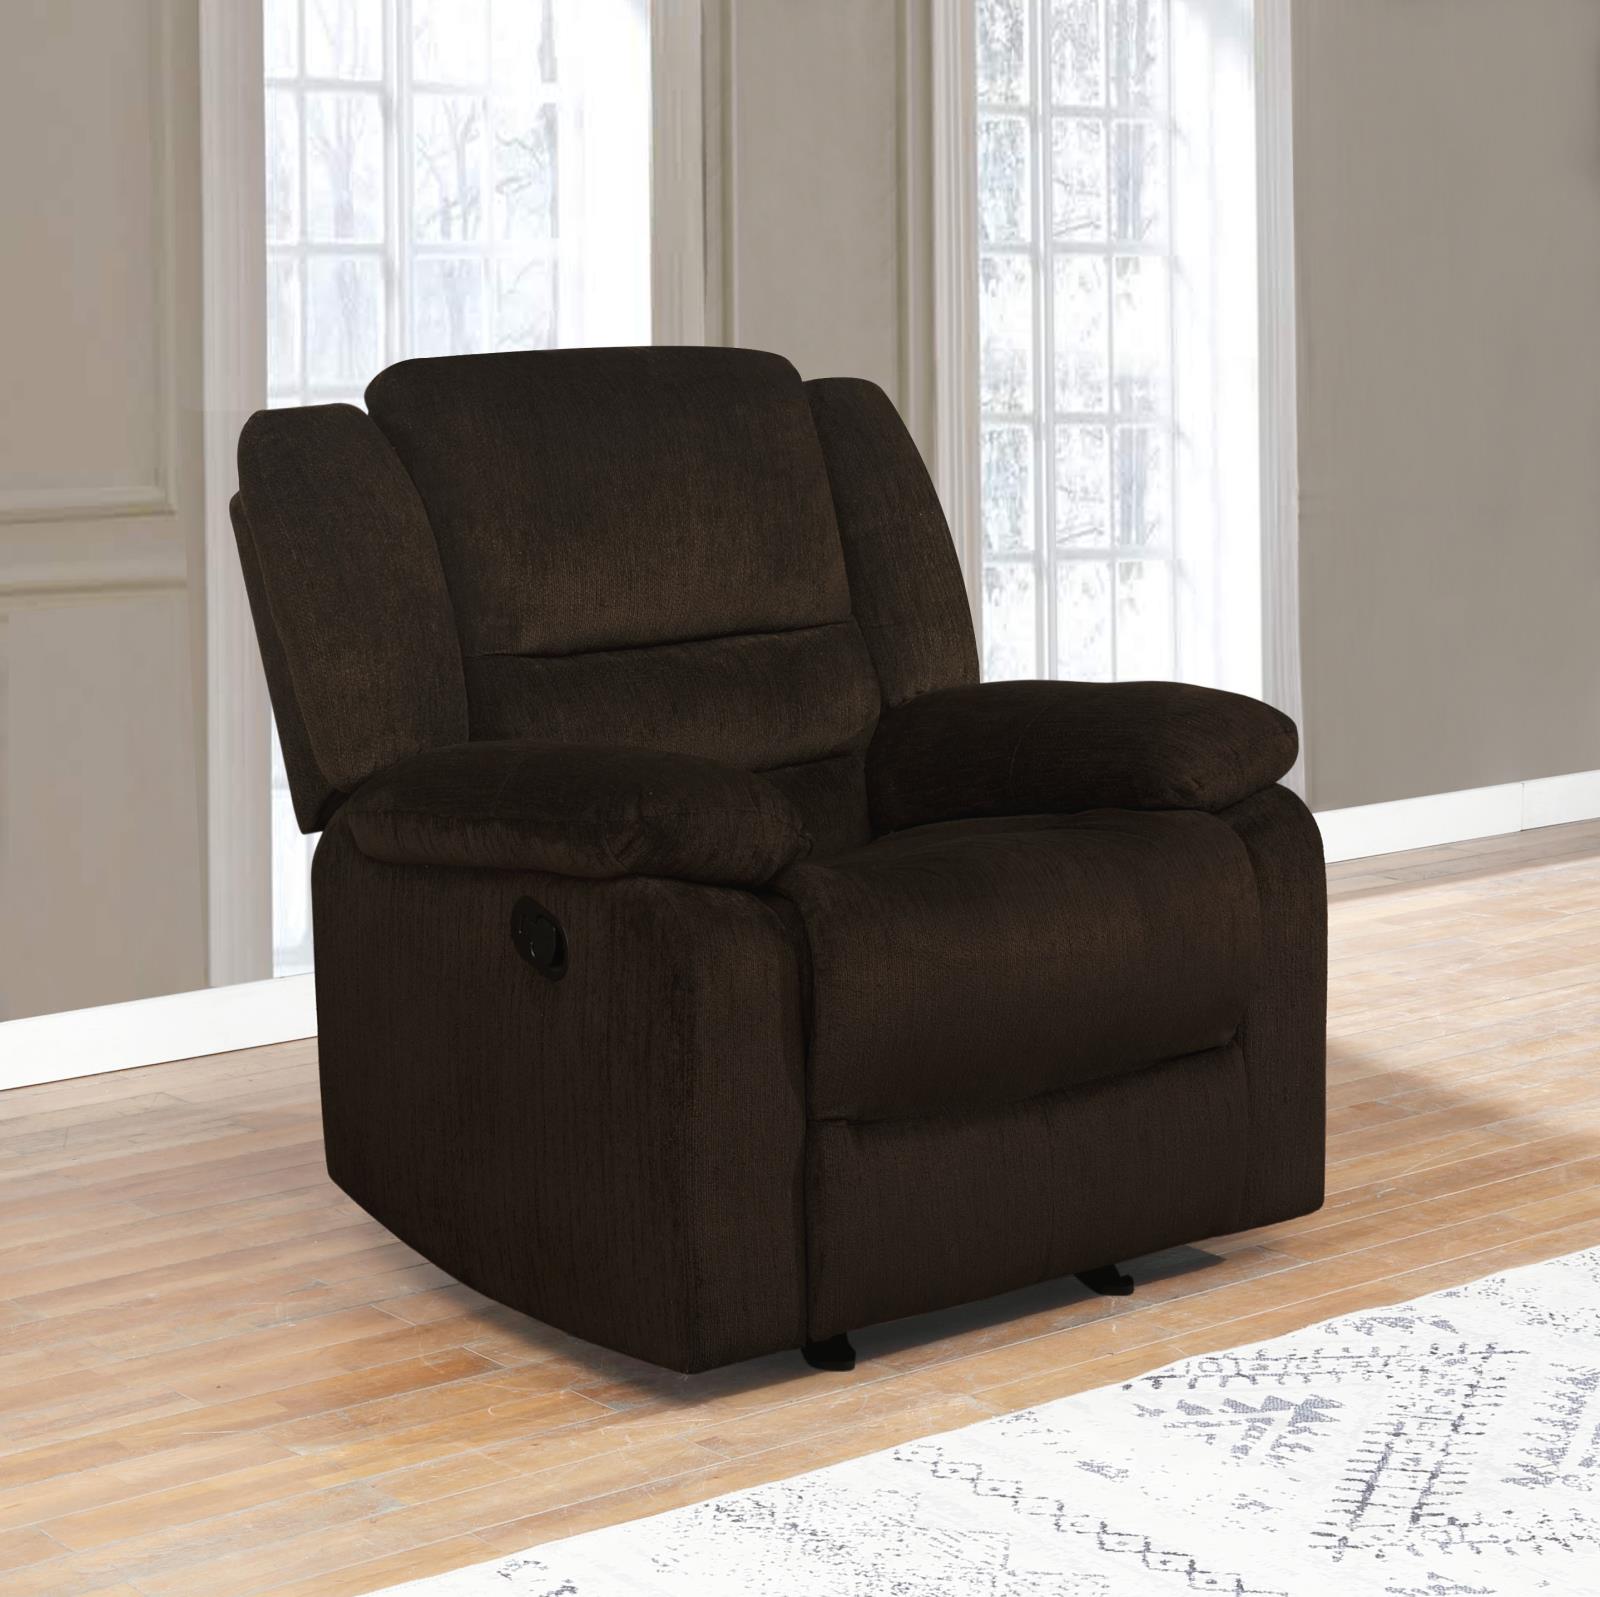 Gordon Upholstered Glider Recliner Chocolate - What A Room